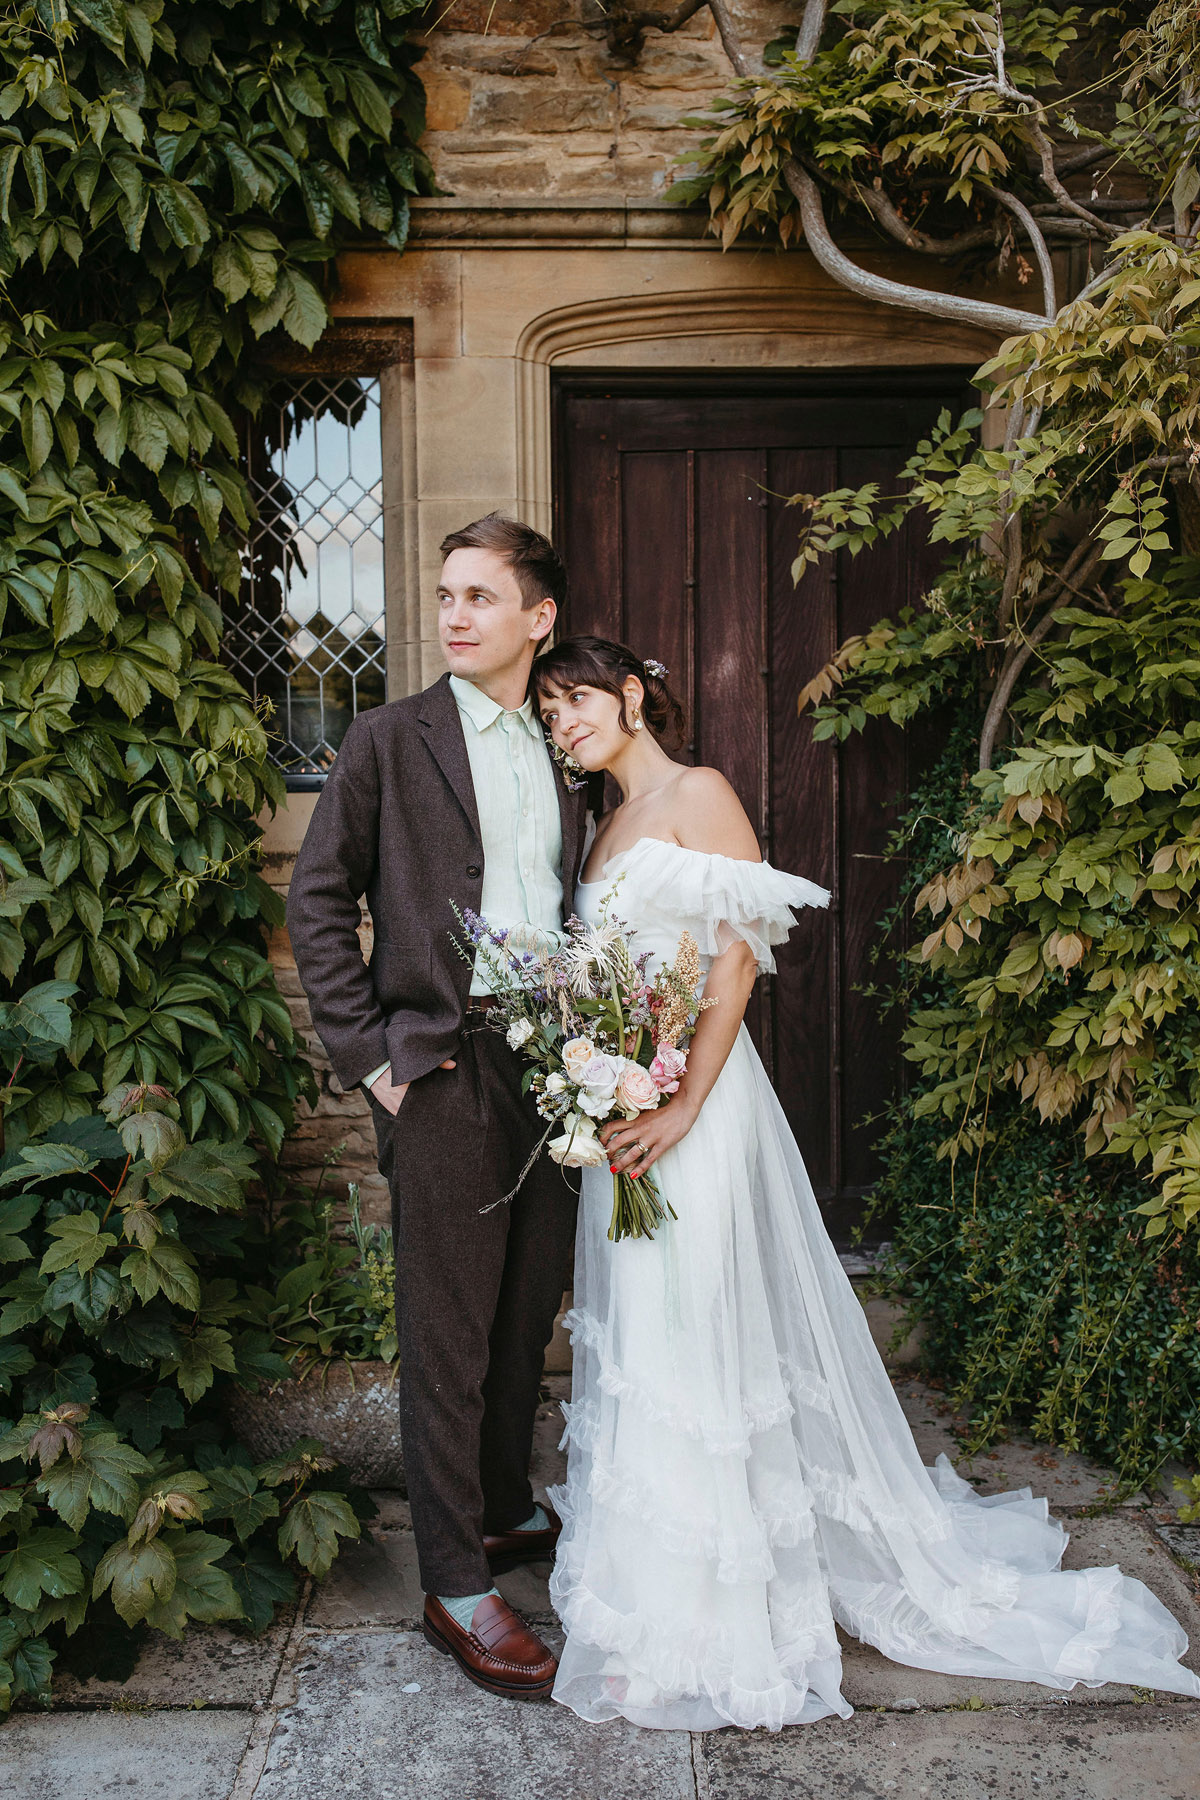 A Folklore Inspired Wedding at Crayke Manor in North Yorkshire – Love My Dress®